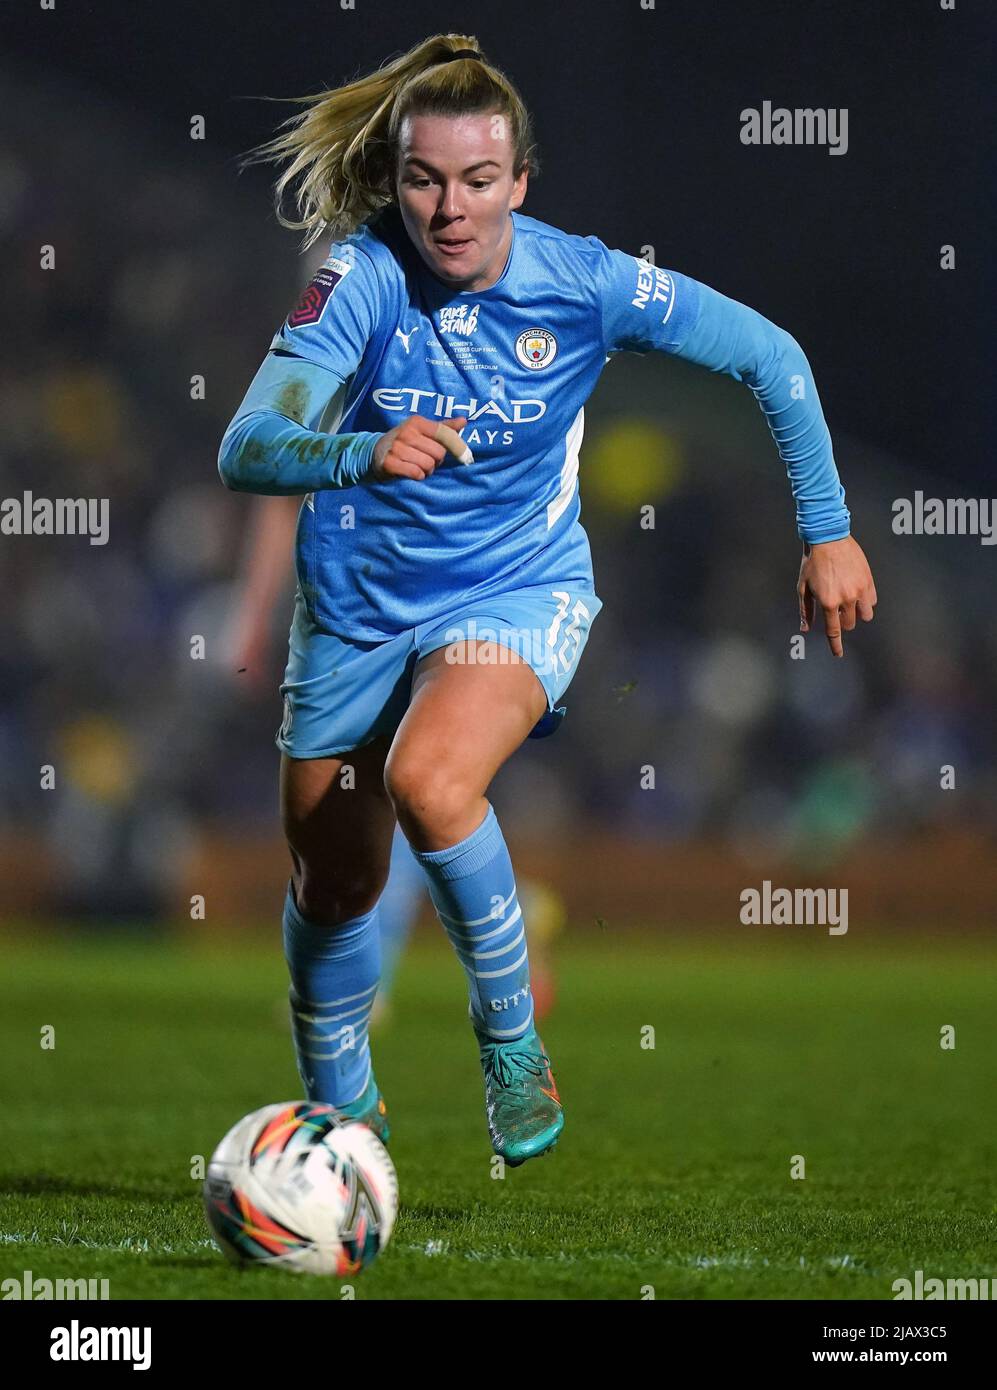 File photo dated 05-03-2022 of Manchester City's Lauren Hemp. Hemp has also made the shortlist for the PFA Women’s Player of the Year alongside City team-mate Alex Greenwood. The pair face stiff competition from Chelsea duo Sam Kerr and Pernille Harder, who helped their team win the domestic double. Arsenal’s classy Dutch forward Vivianne Miedema and her Gunners team-mate Kim Little compete the main player of the year shortlist. . Issue date: Wednesday June 1, 2022. Stock Photo